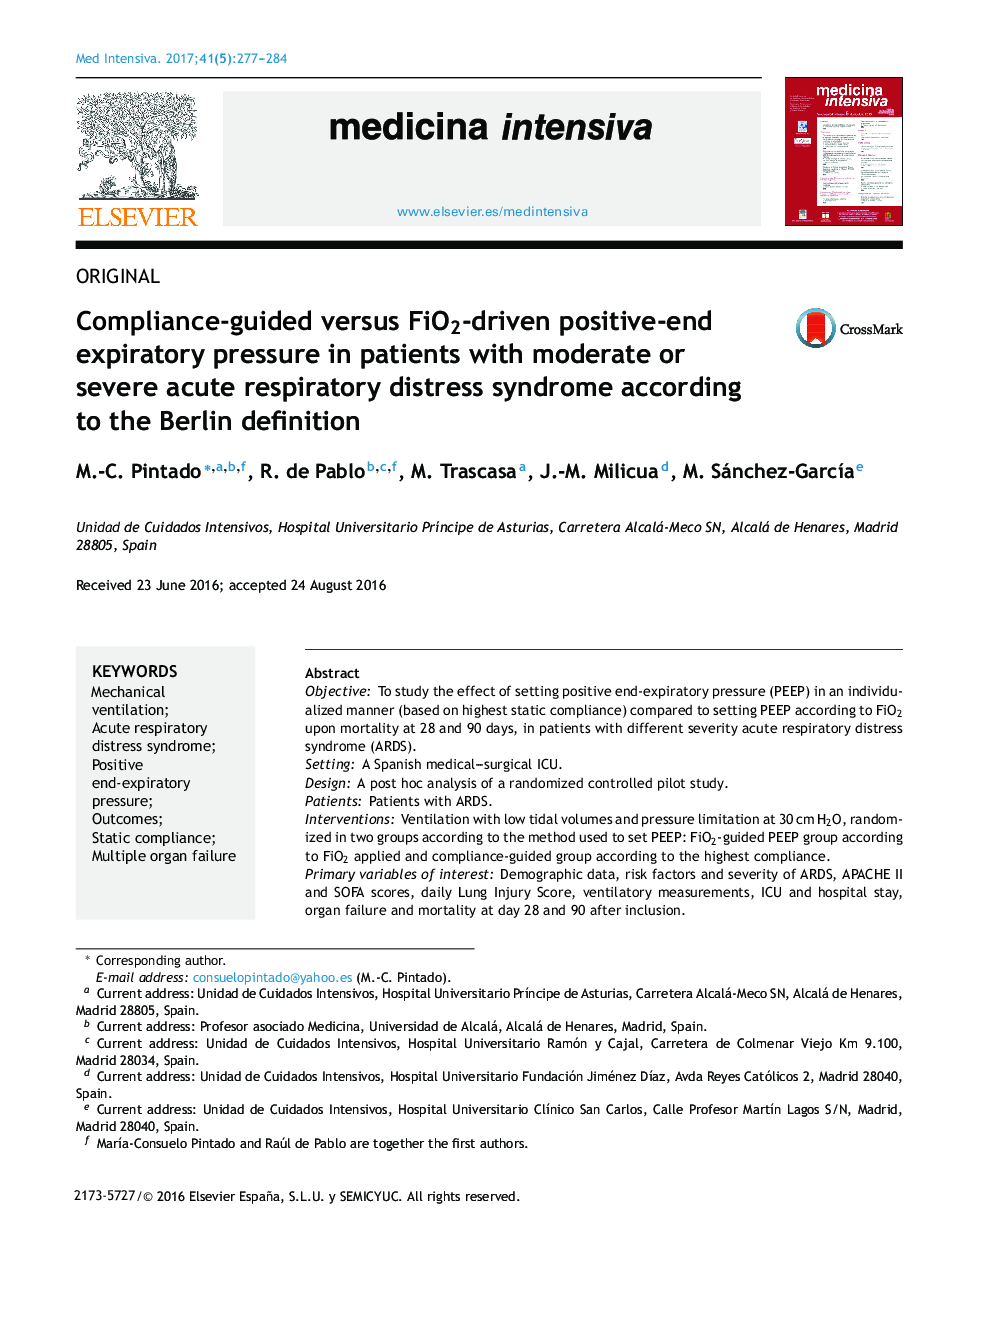 Compliance-guided versus FiO2-driven positive-end expiratory pressure in patients with moderate or severe acute respiratory distress syndrome according to the Berlin definition